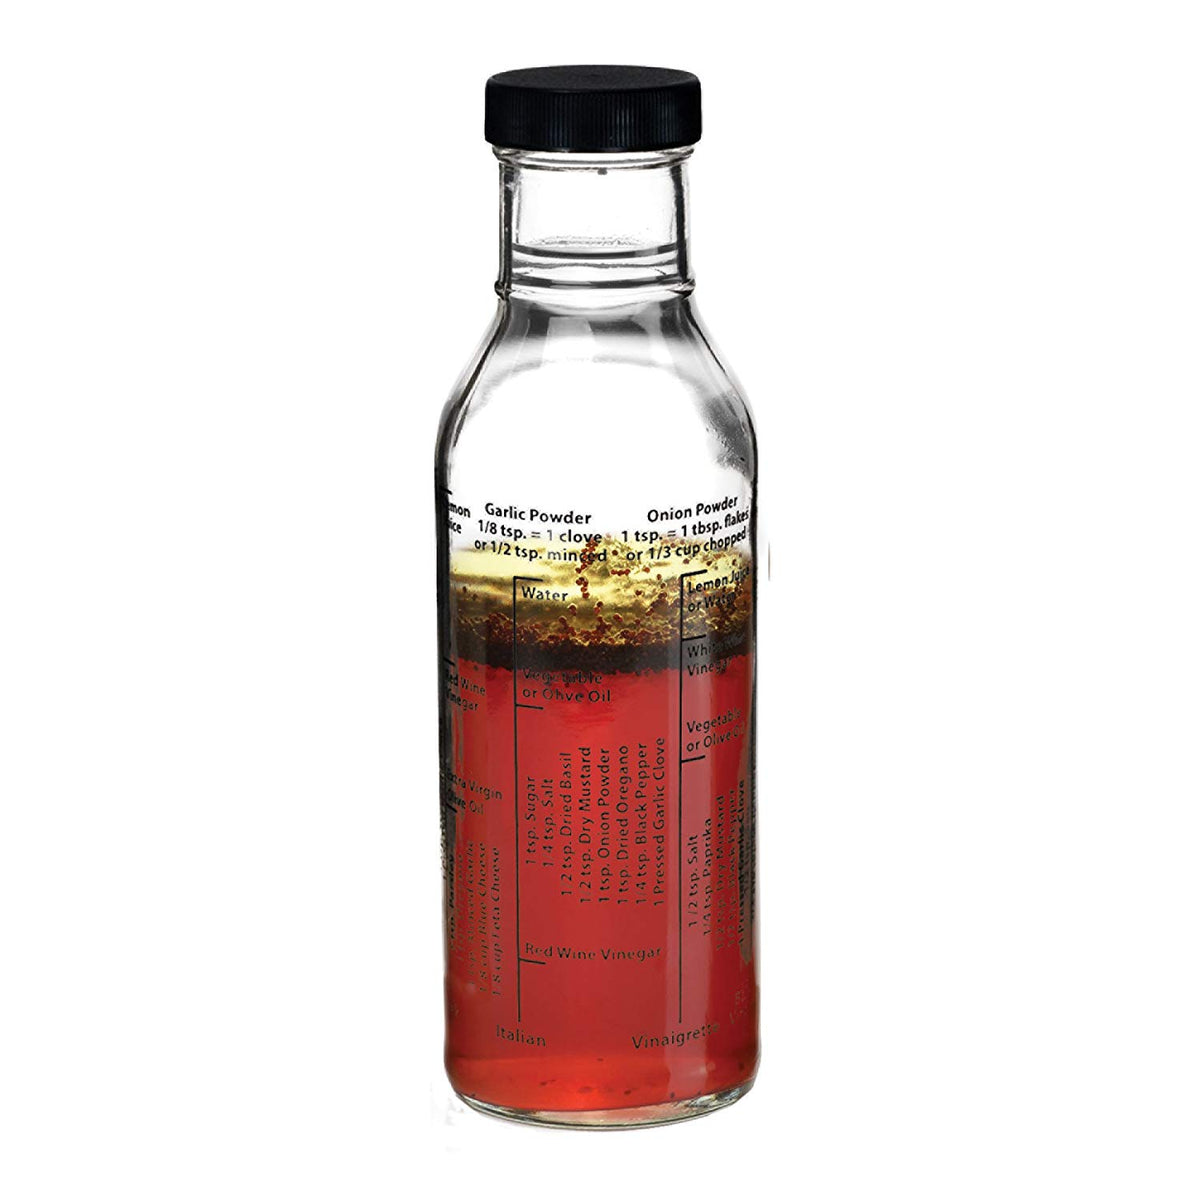 Salad Dressing Bottle - Accessories - Red Stick Spice Company